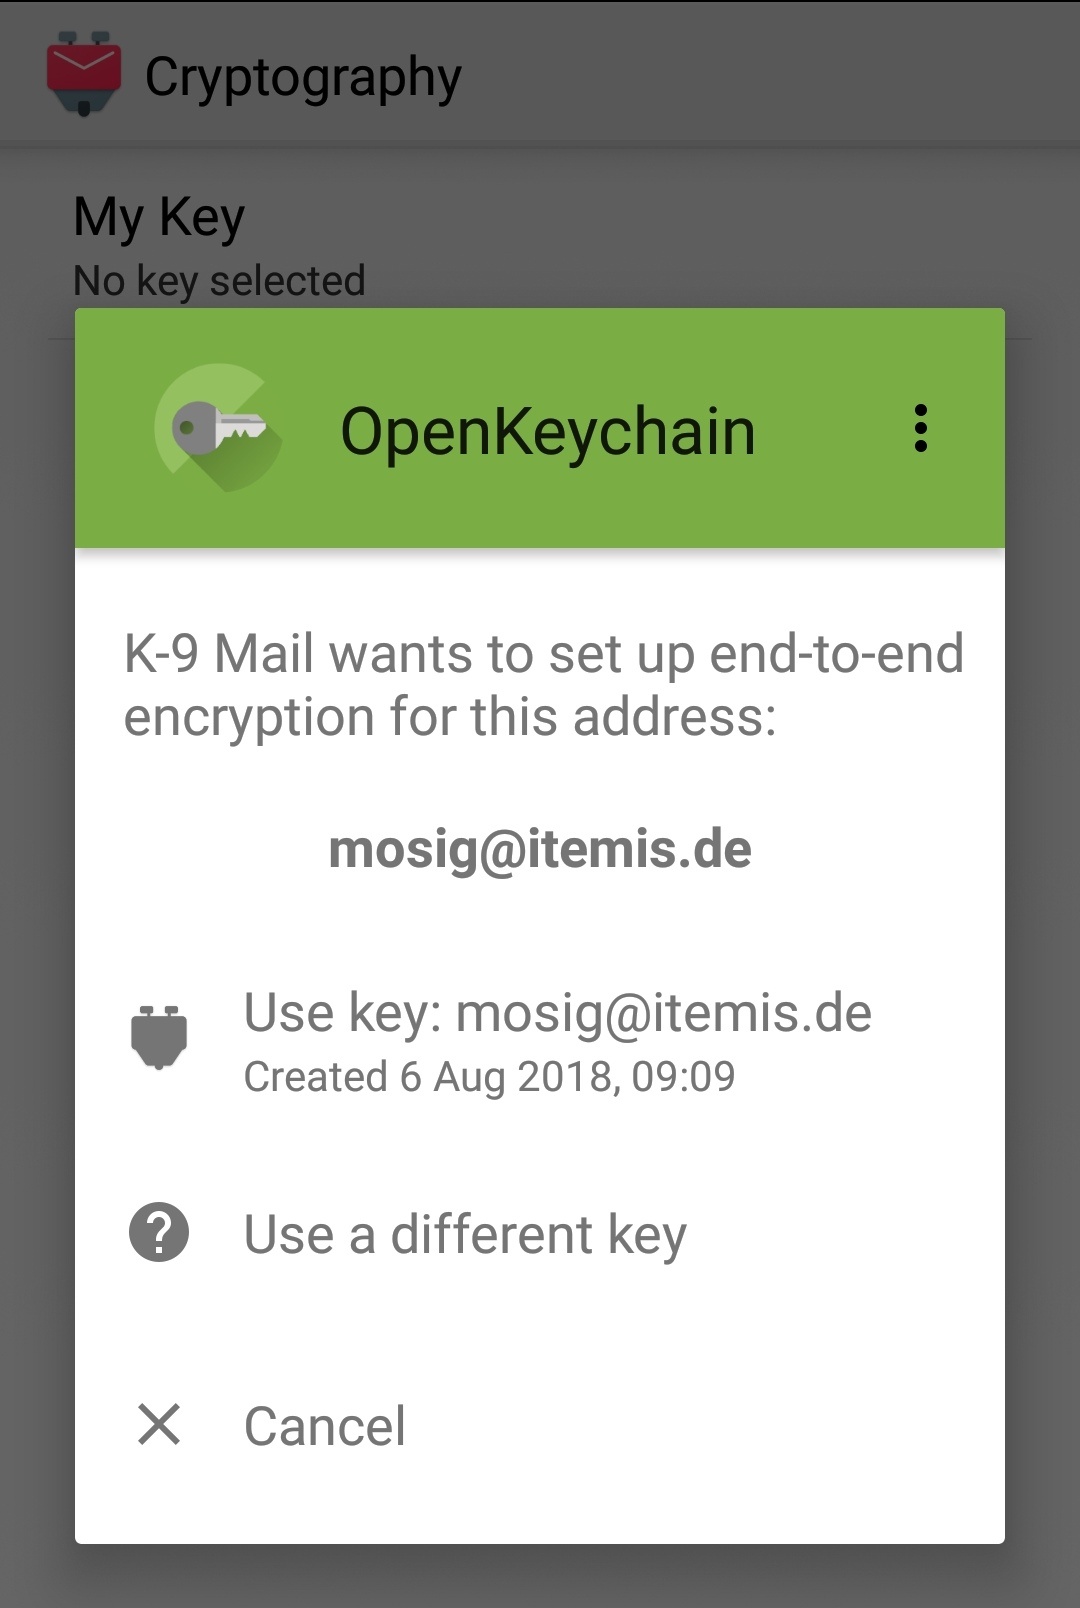 K-9 Mail  – selection of private key for the e-mail account